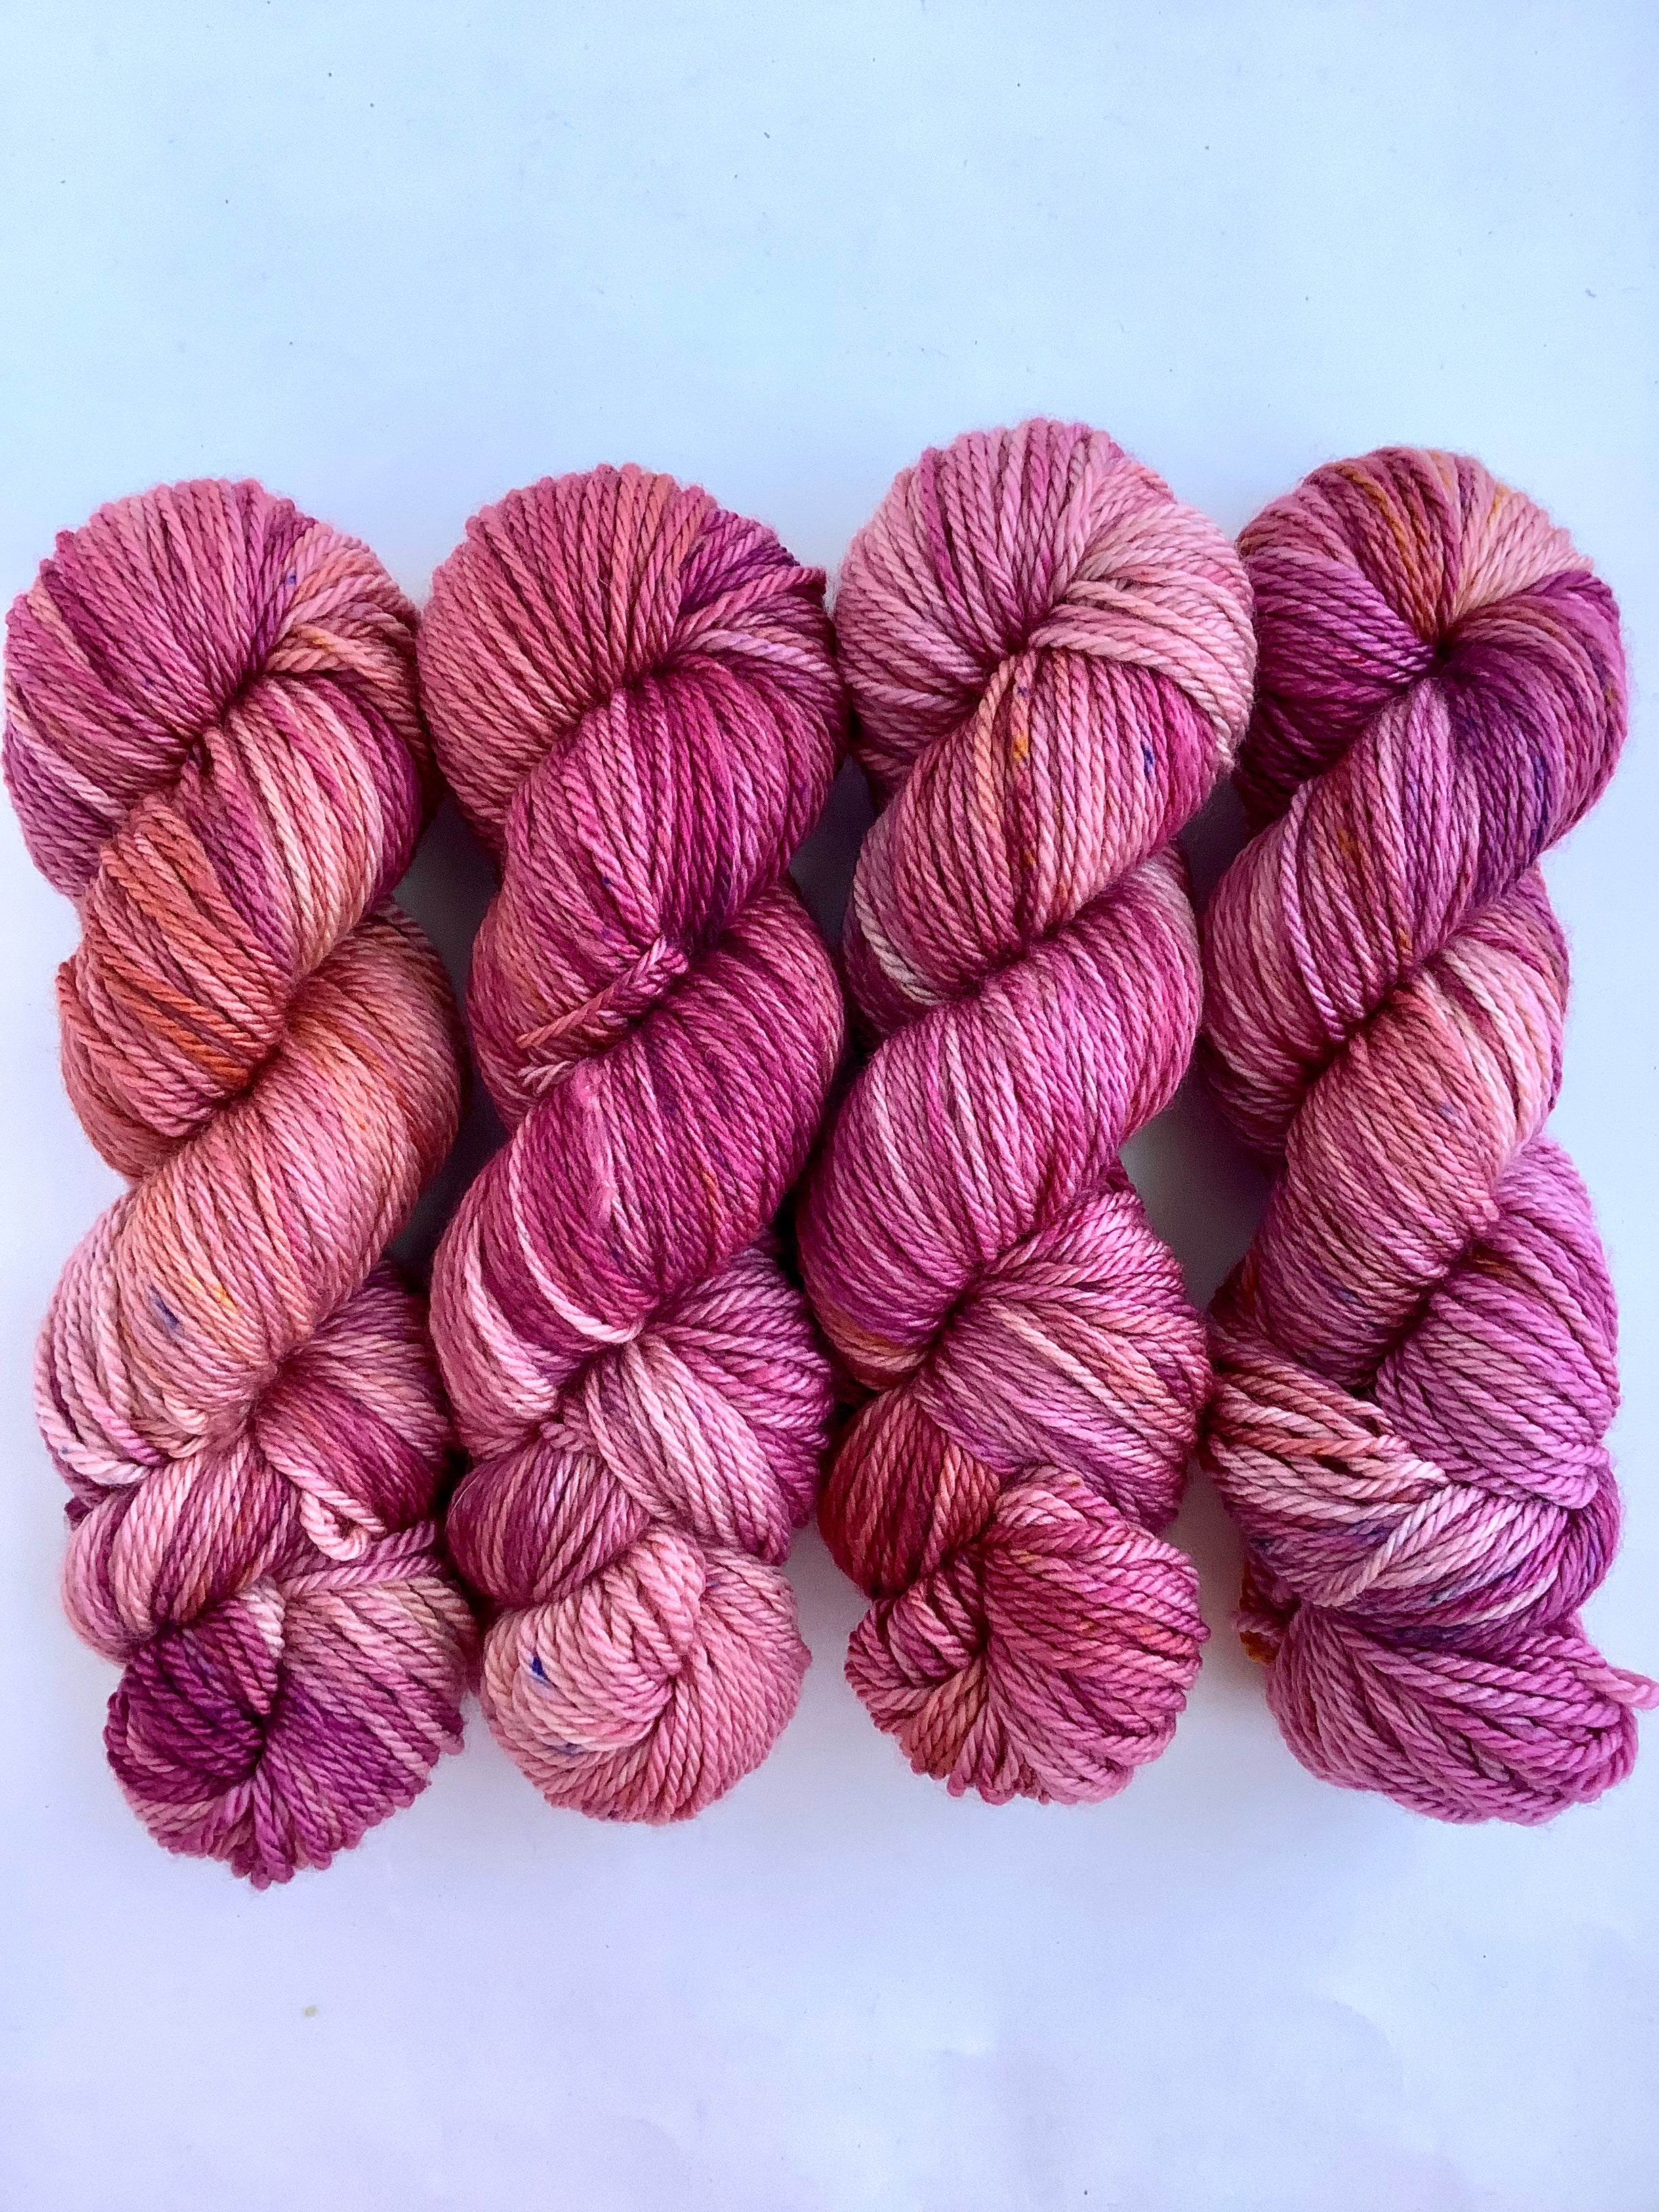 Tributary Worsted yarn